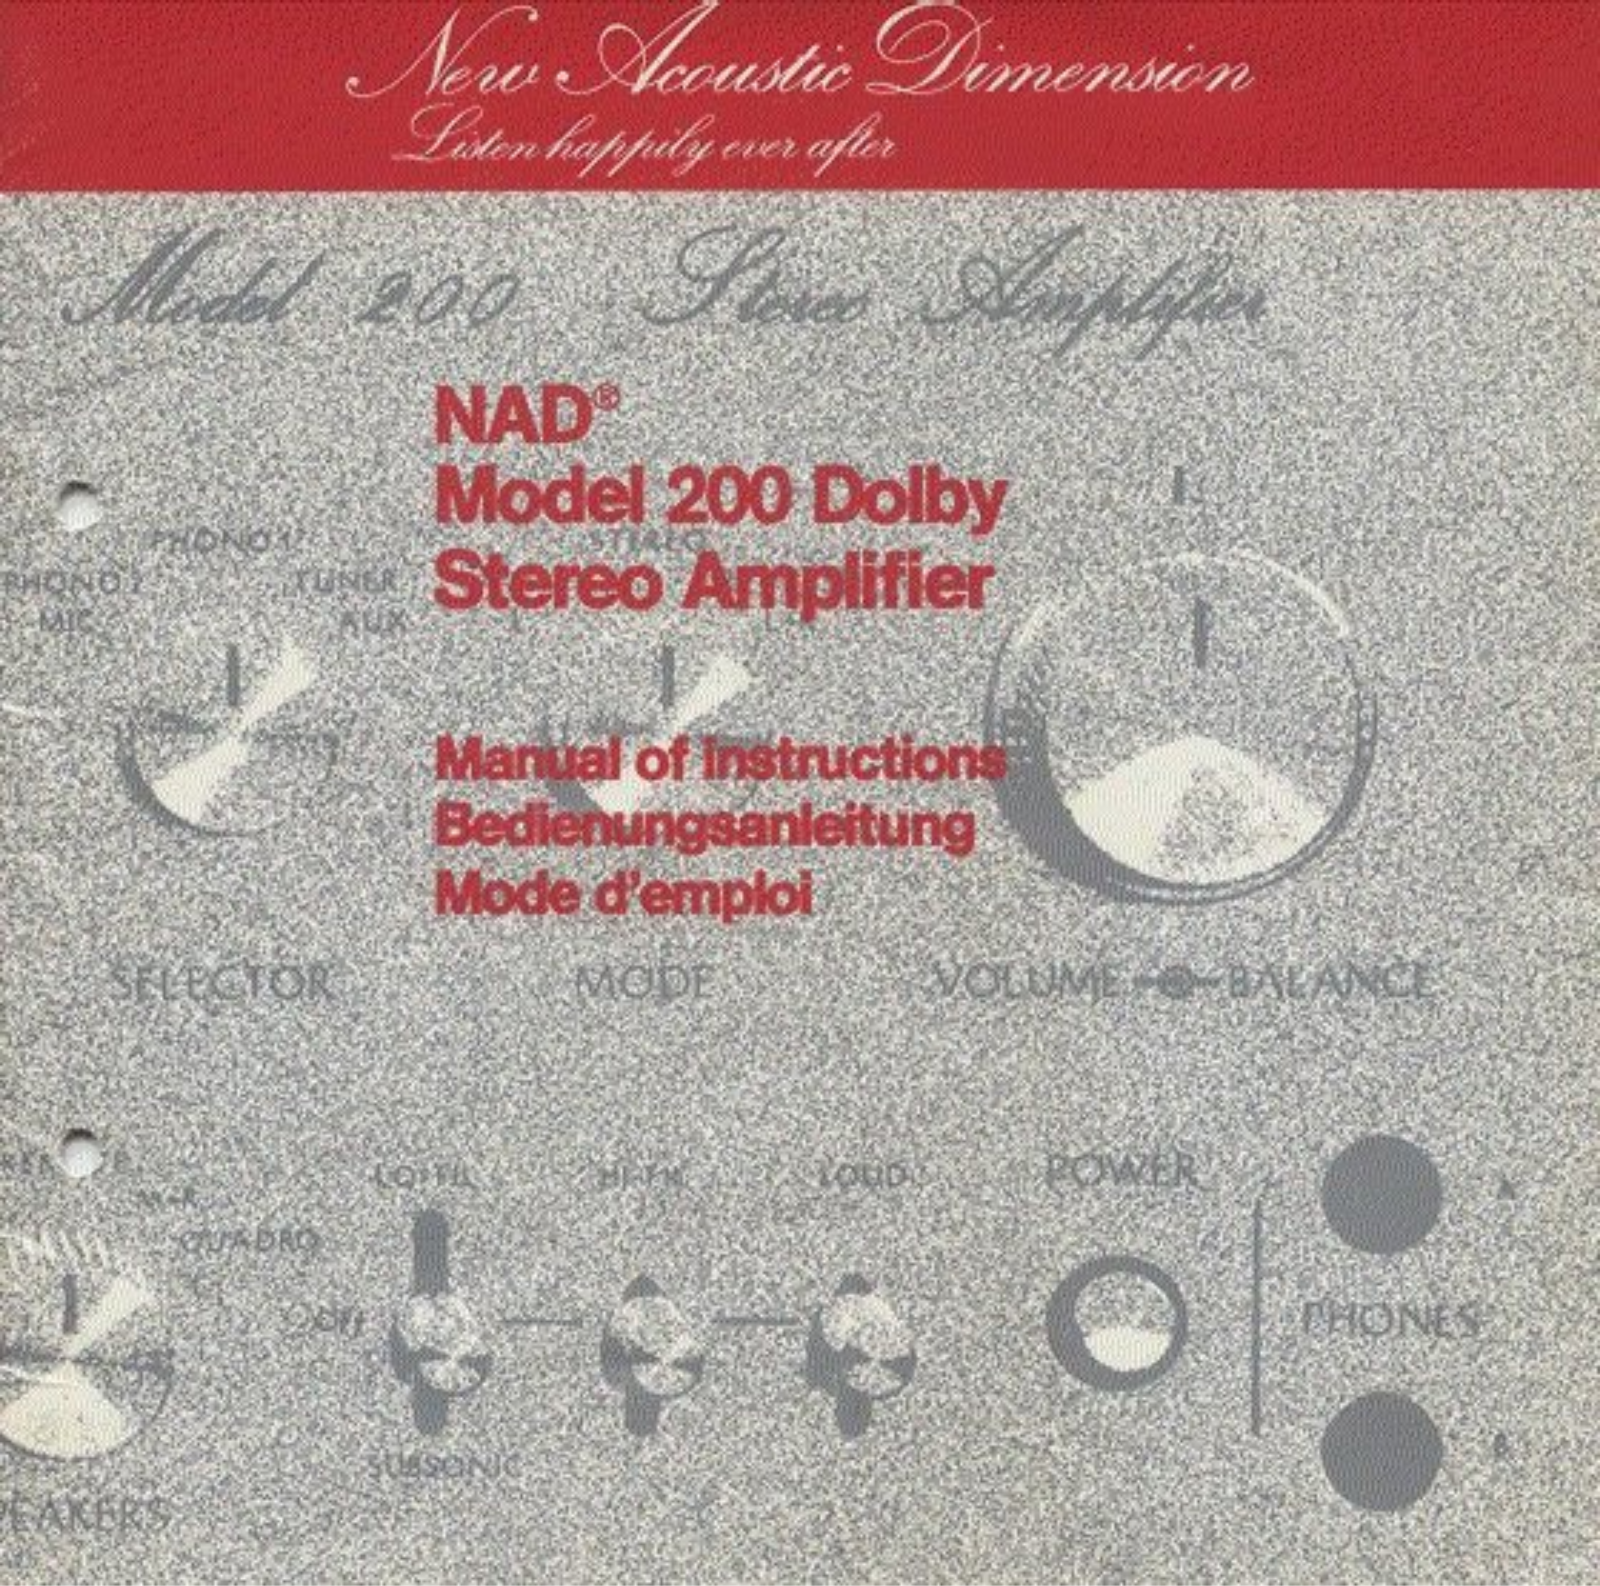 Nad 200 Owners Manual